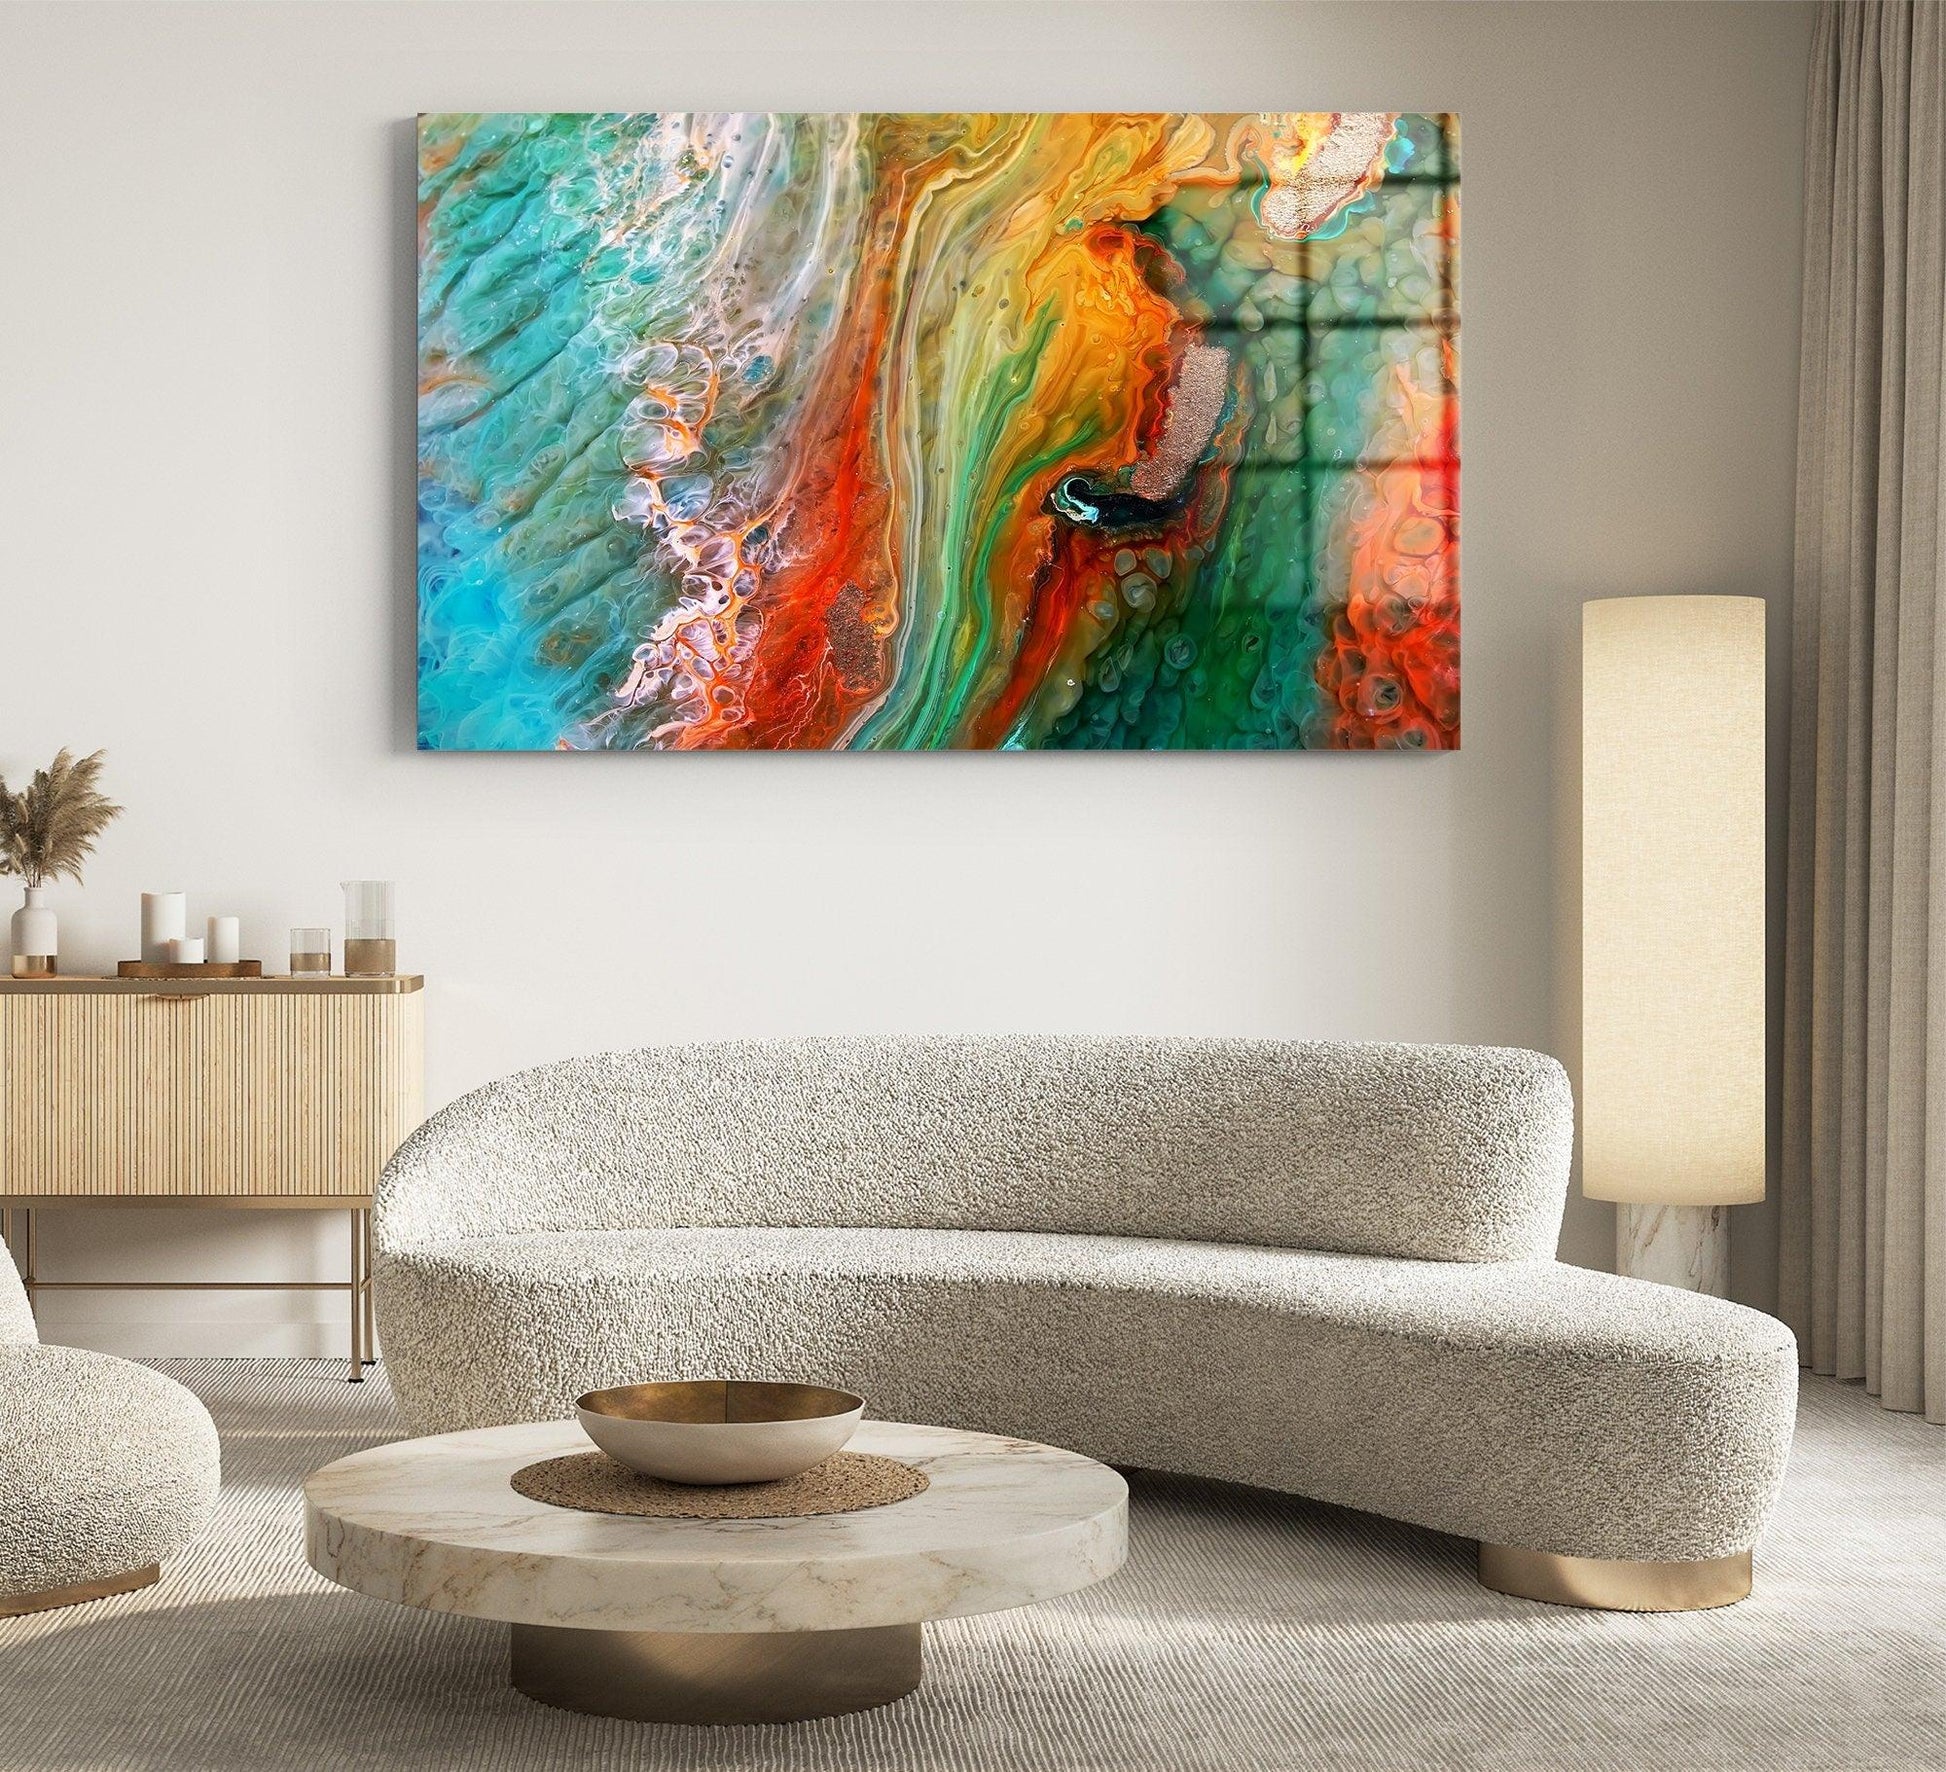 Cosmic Liquid wall Art| Abstract Canvas, Poster Art Reproduction, Large Abstract Canvas Wall Art, Modern Art Expressionism Painting - TrendiArt